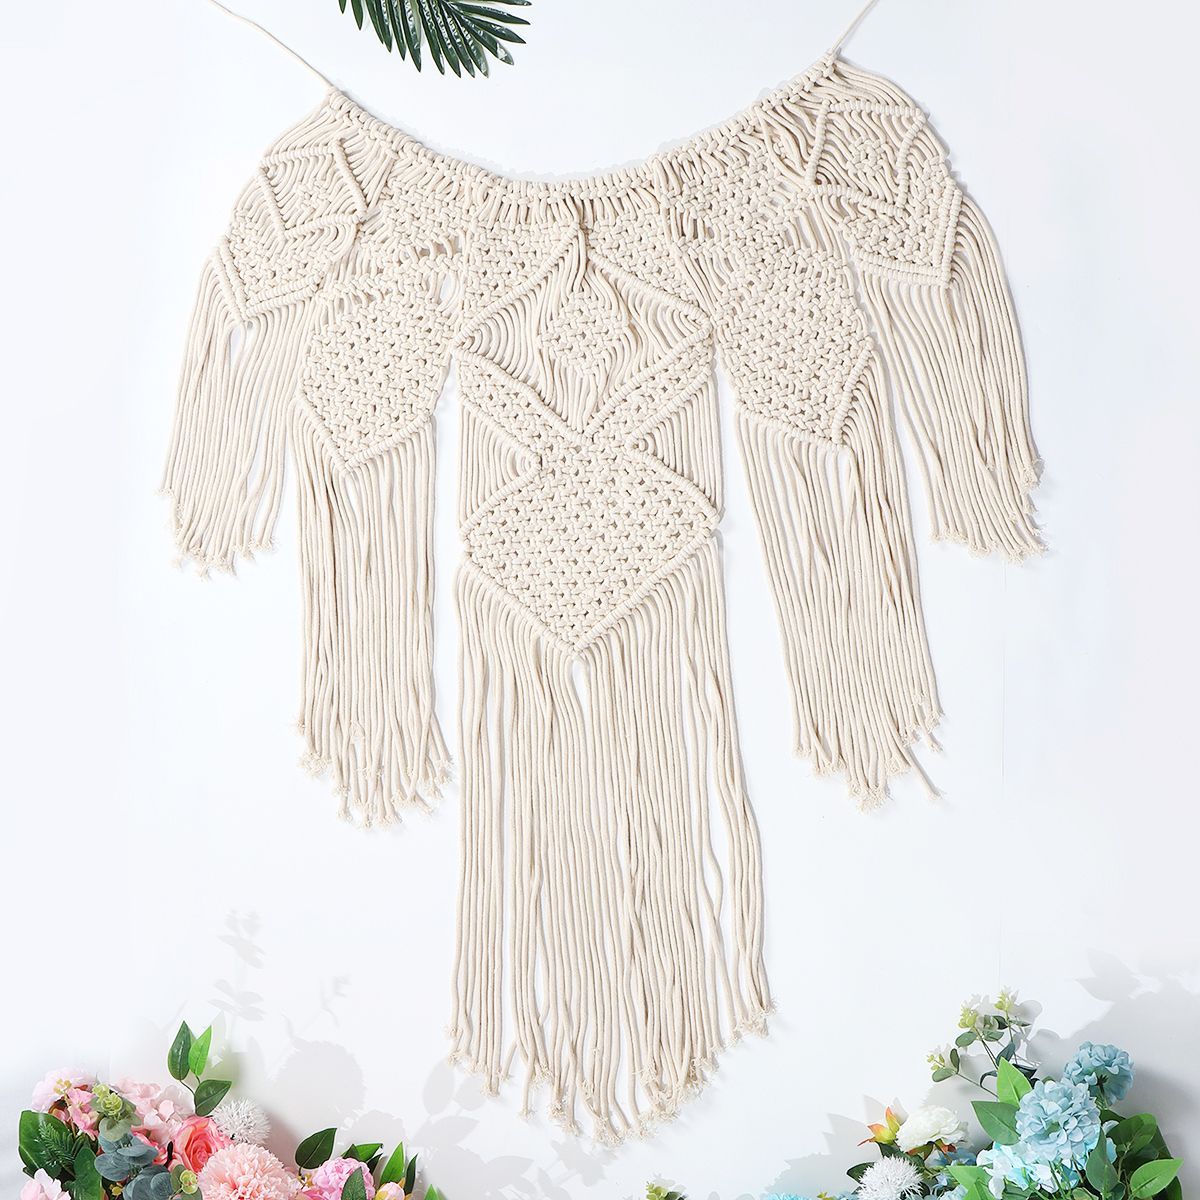 Large-Woven-Macrame-Wall-Hanging-Cotton-Bohemian-Tapestry-Room-Decoration-1727277